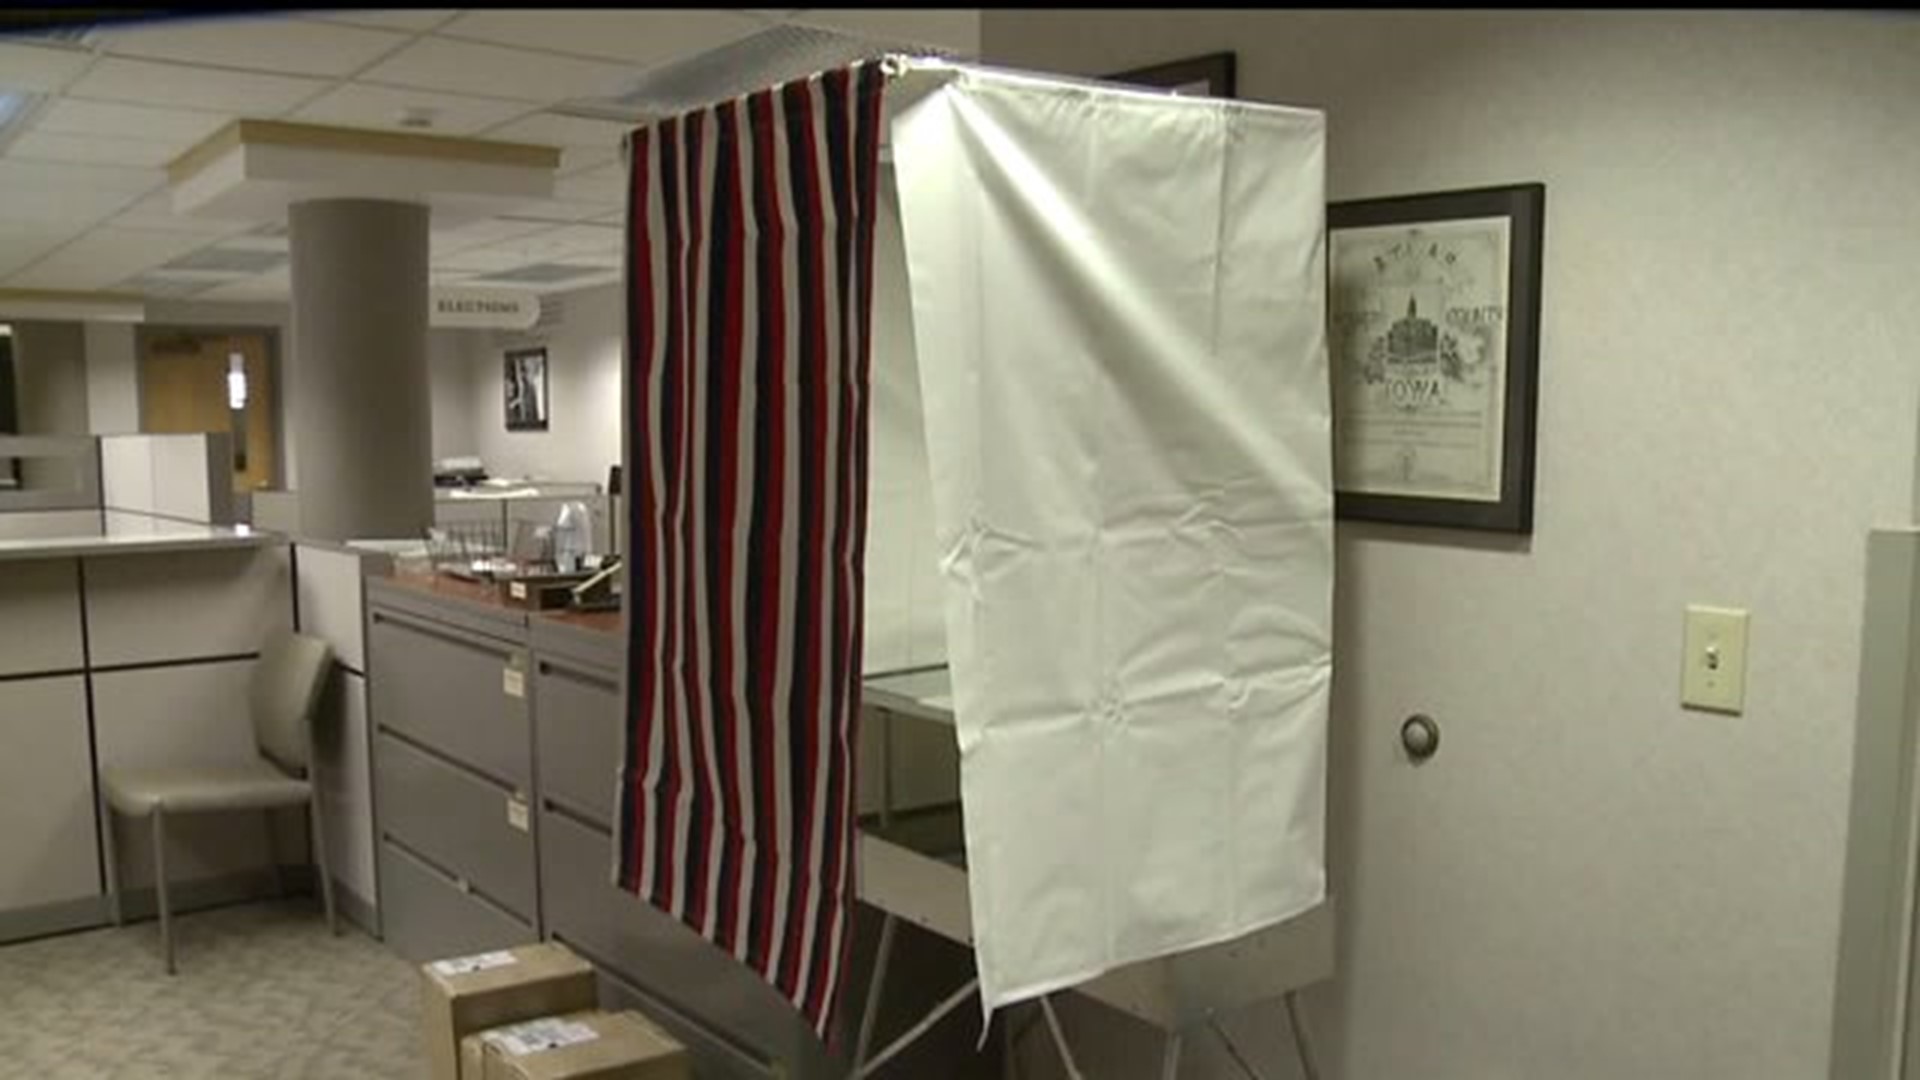 Polls open at 7 a.m. in Davenport for special House election